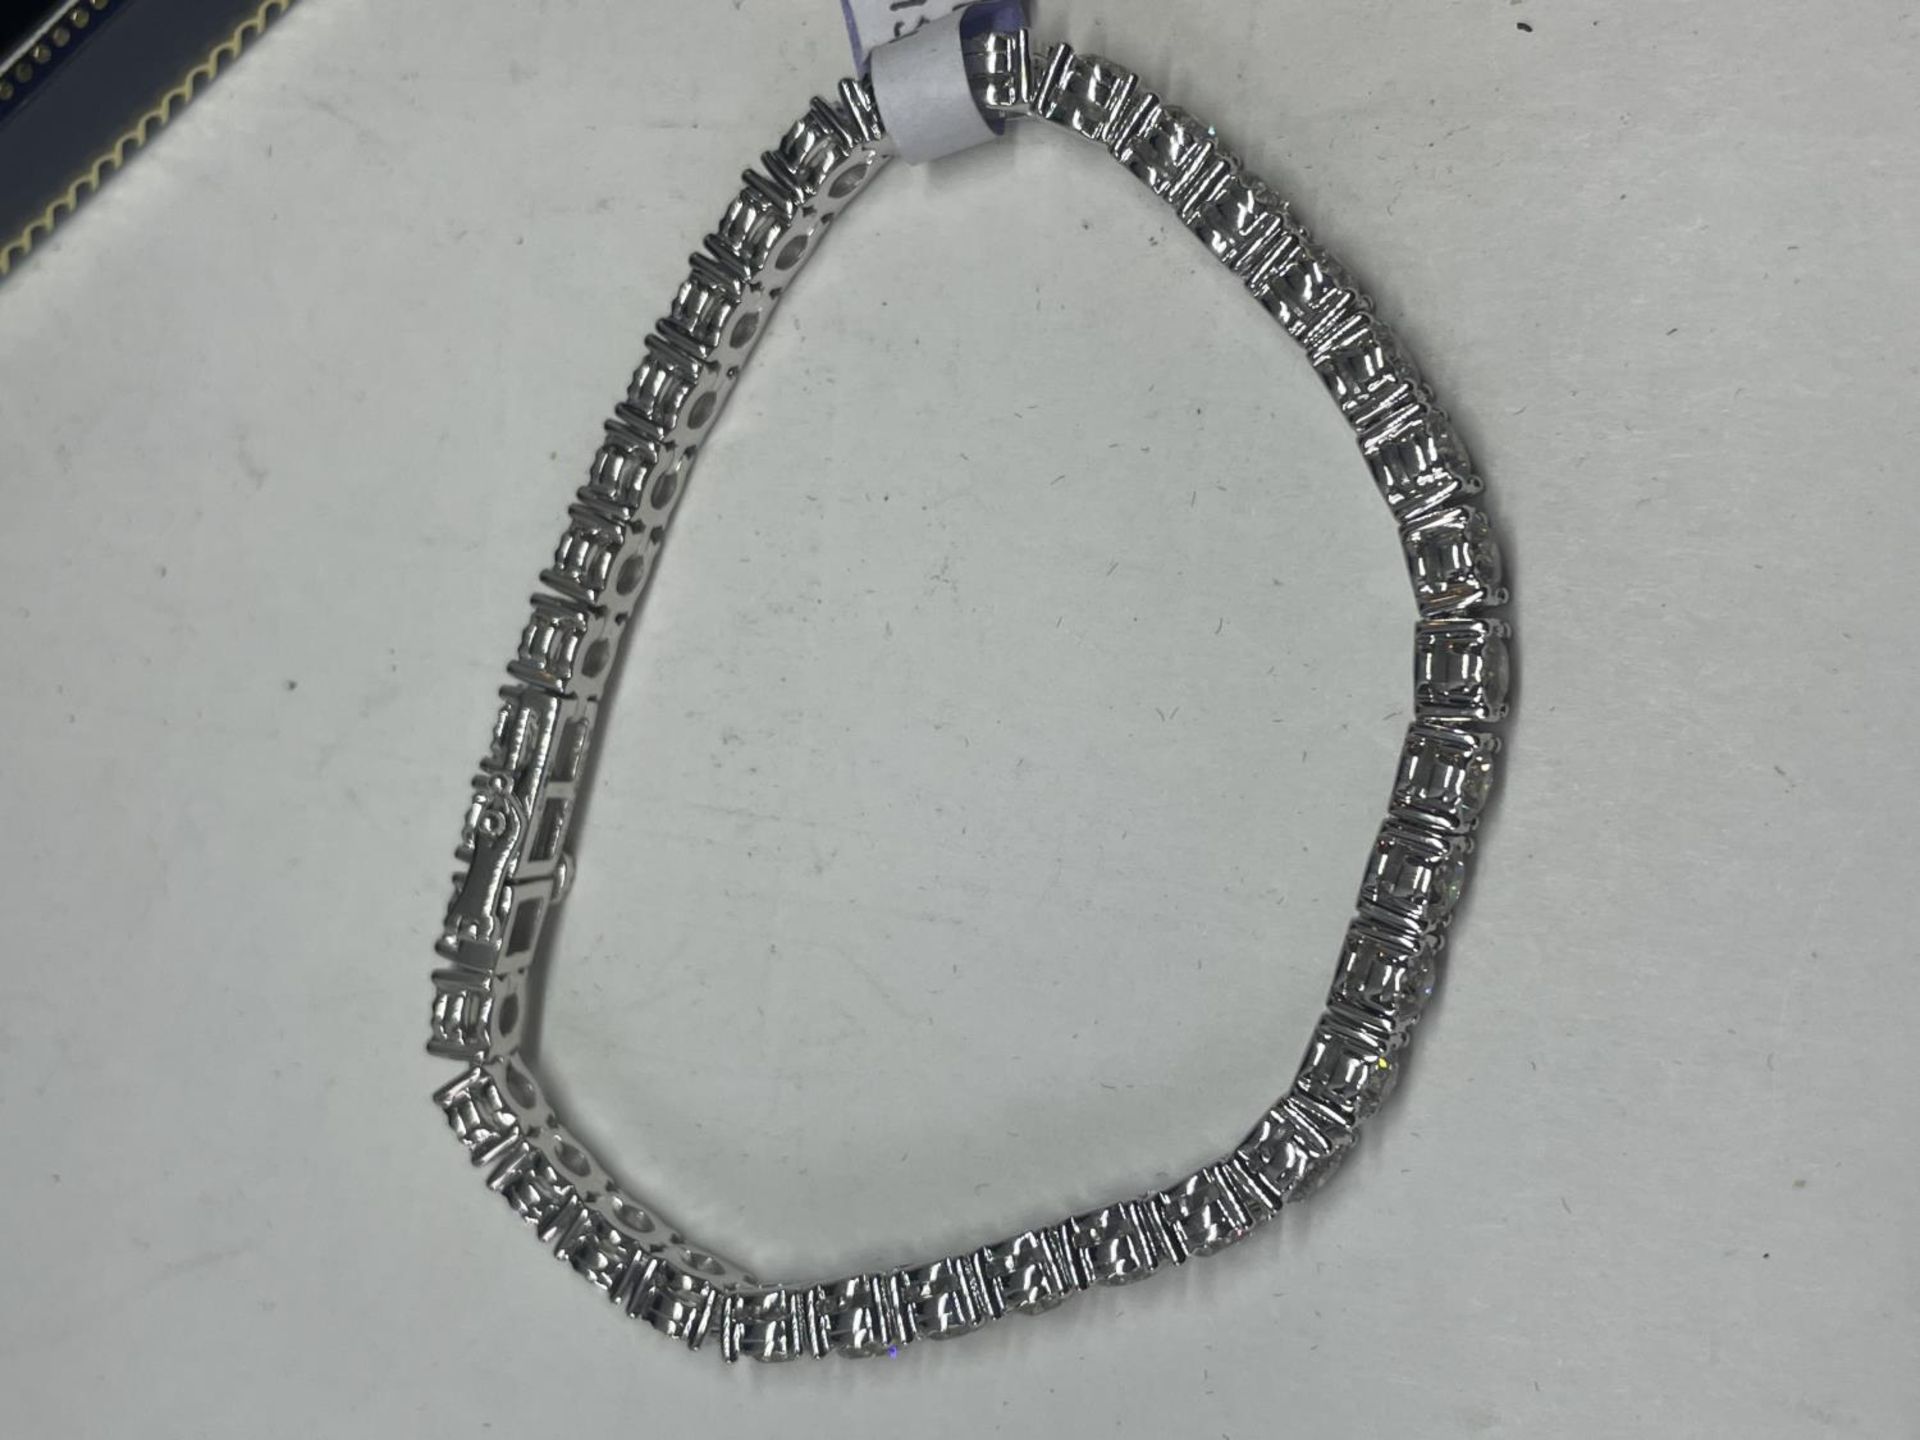 A NEW 9 CARAT WHITE GOLD BRACELET, SET WITH BRILLIANT CUT DIAMONDS - TOTAL DIAMOND WEIGHT 11.10 - Image 5 of 6